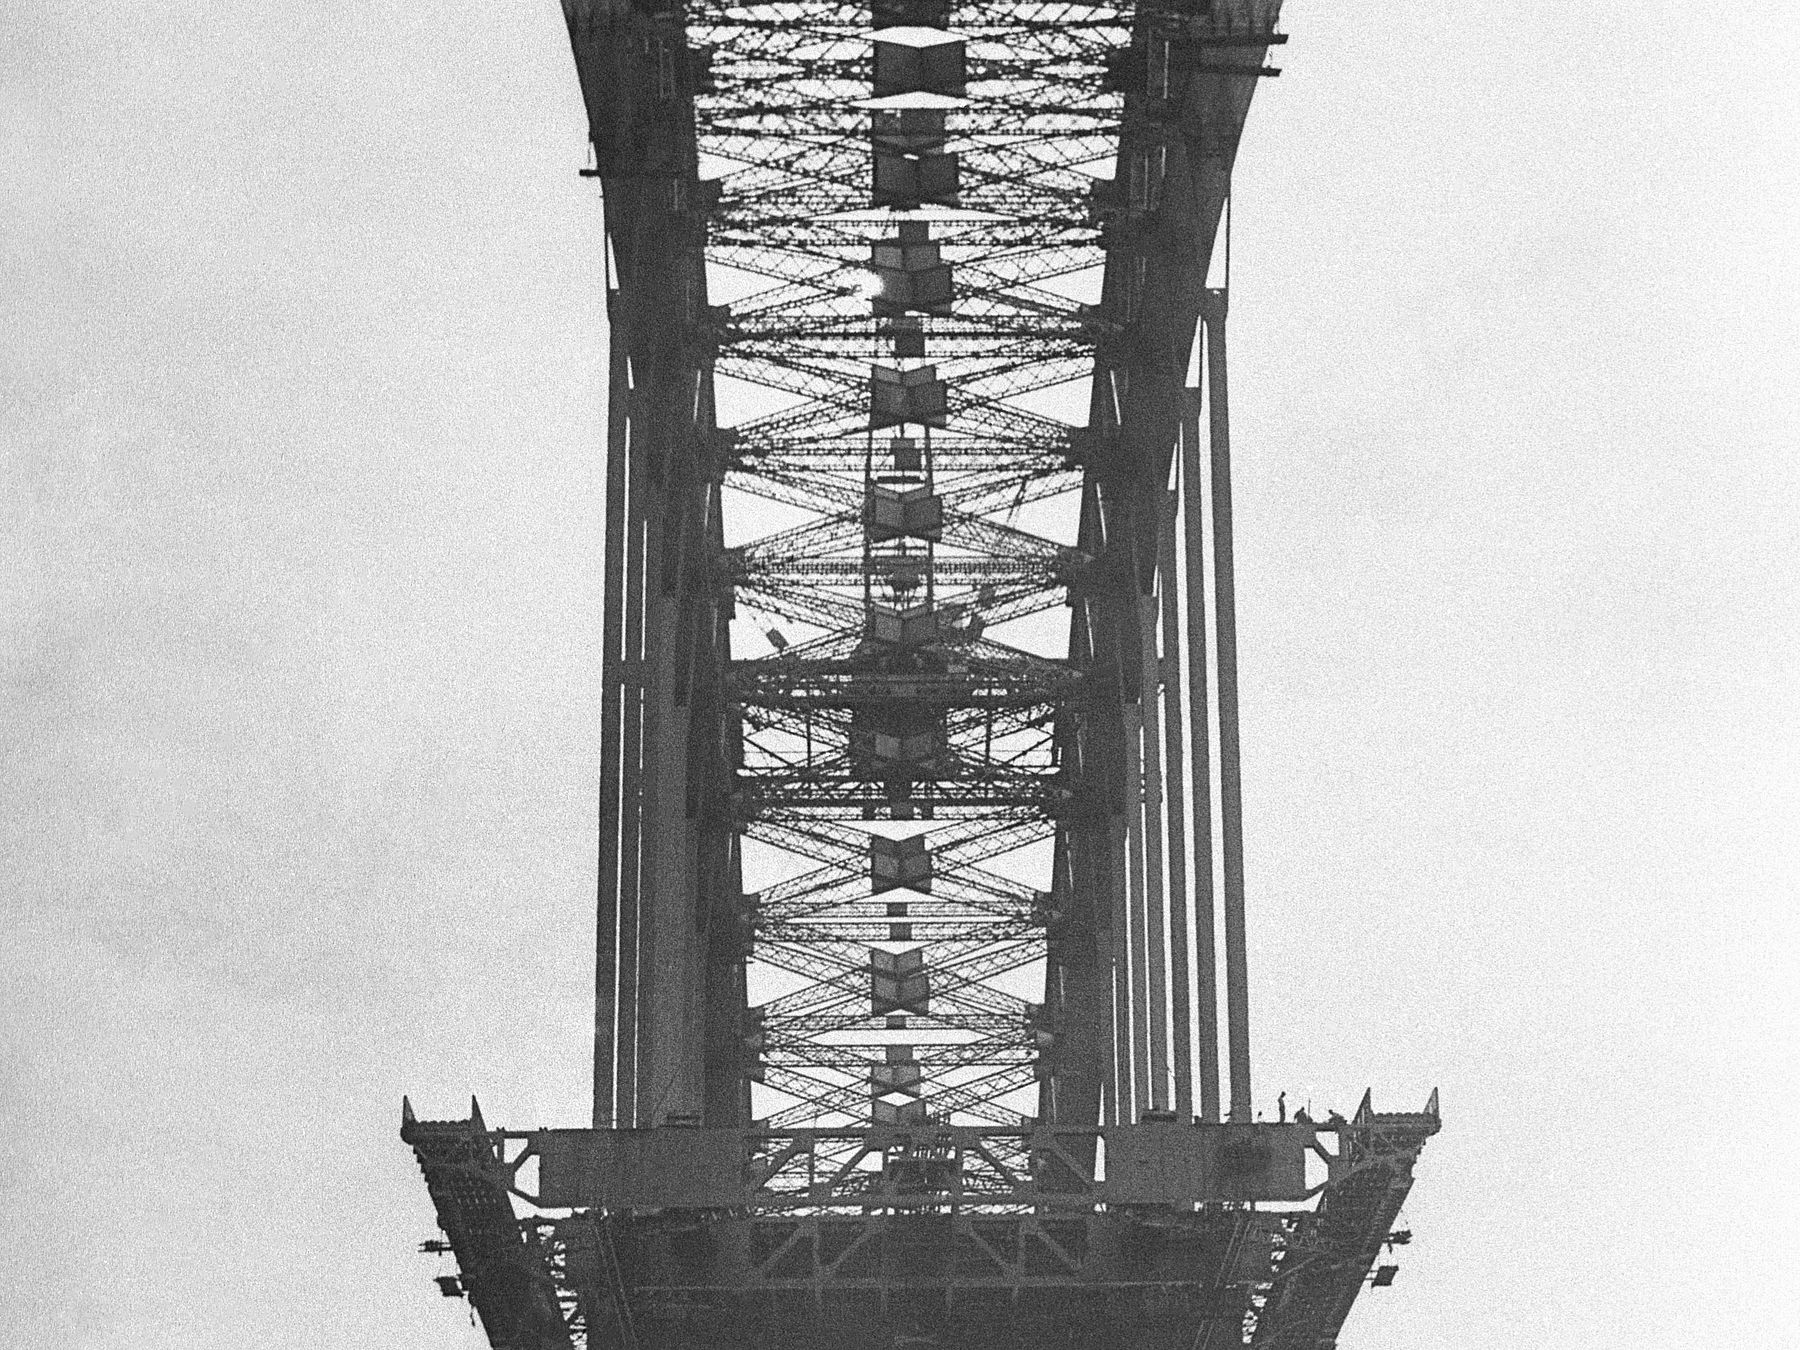 First sections of decking Sydney Harbour Bridge, photograph by Ted Hood, 1911-2000, Home and Away – 2186
